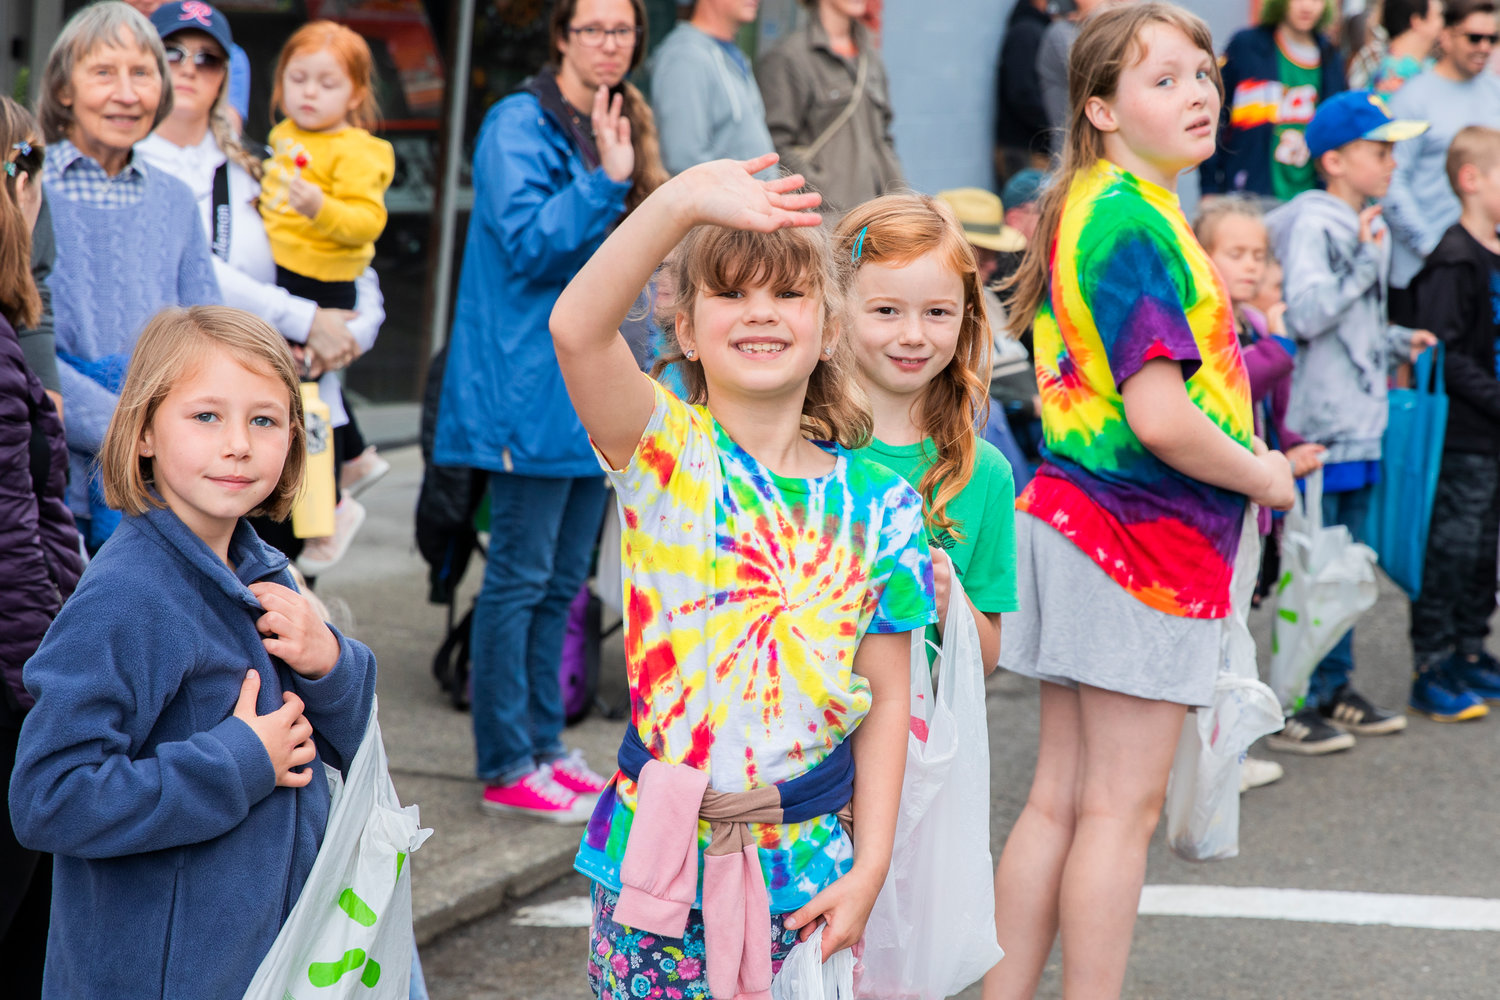 Kids smile and wave with bags full of candy during the Egg Days Festival parade in Winlock on Saturday.